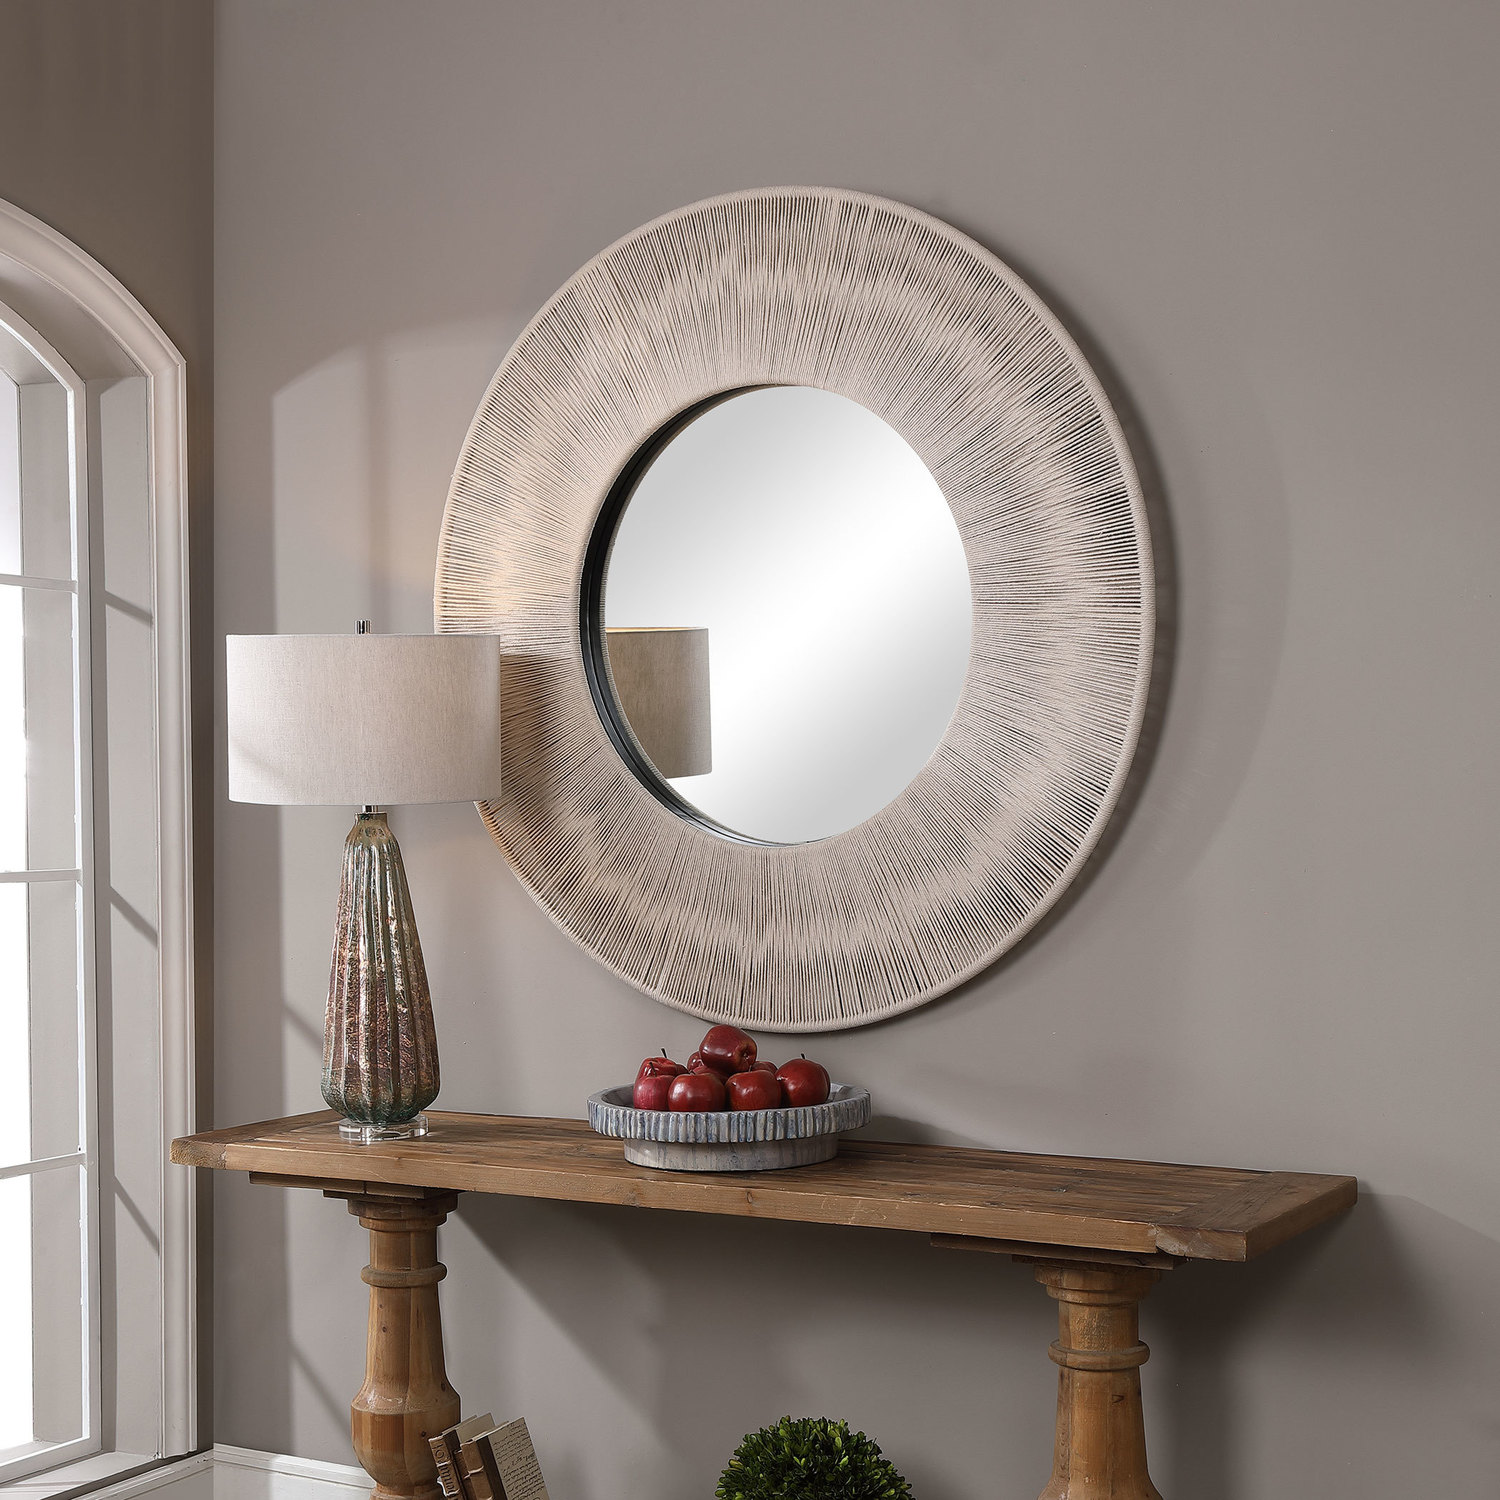 oval tall mirror Uttermost Round Mirror With Combined Natural Texture And Materials, This Round Mirror Pays Homage To Its Coastal Inspiration. Neutral Beige Rope Is Stretched Over A Solid Iron Frame To Create A Casual And Versatile Design.